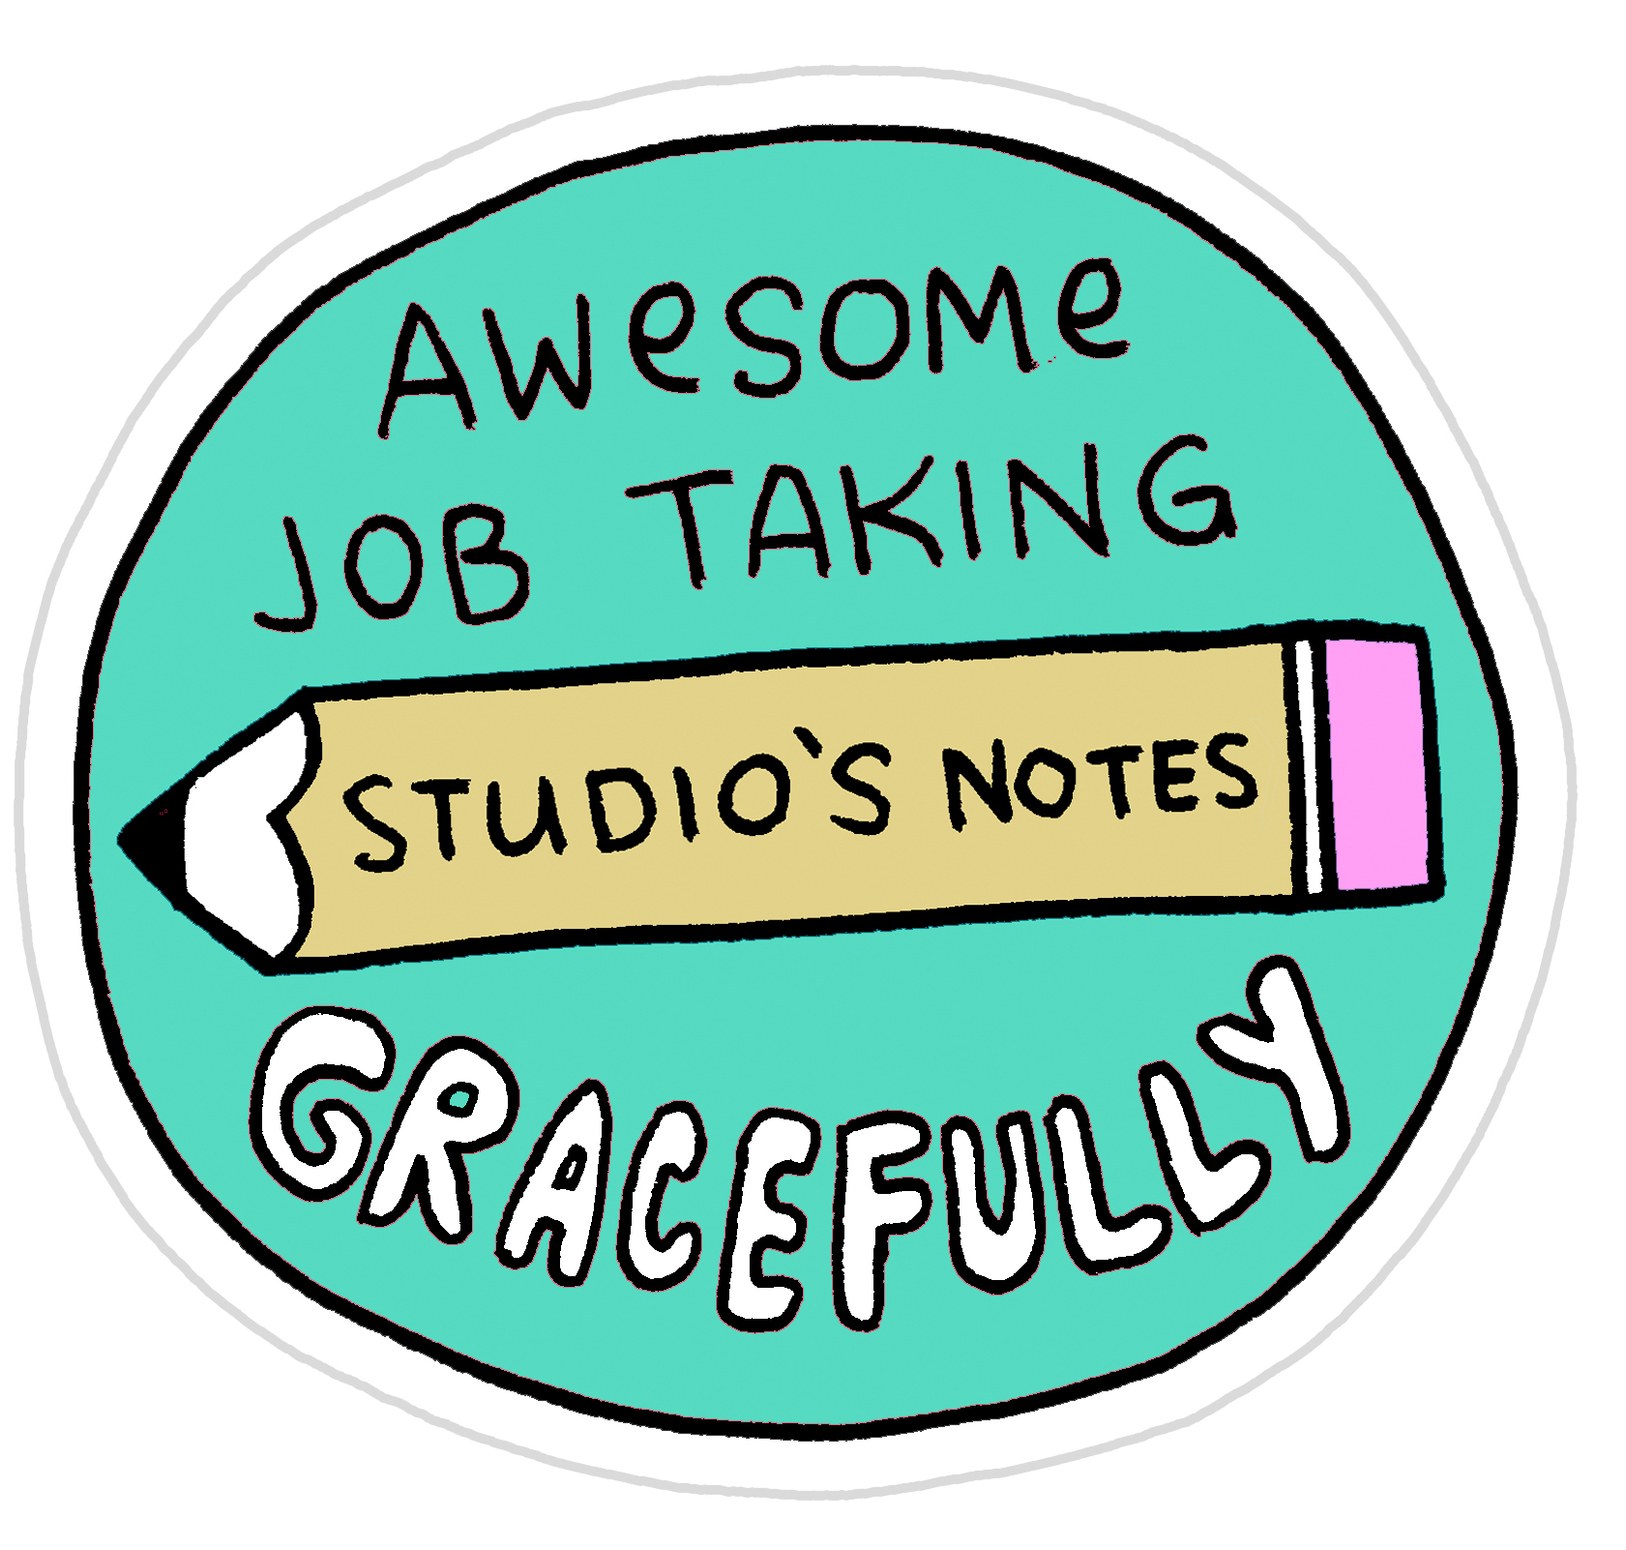 Achievement Stickers for Your Favorite Freelance Architect and Interior Designer (We Mean YOU) | Fohlio | awesome job taking notes